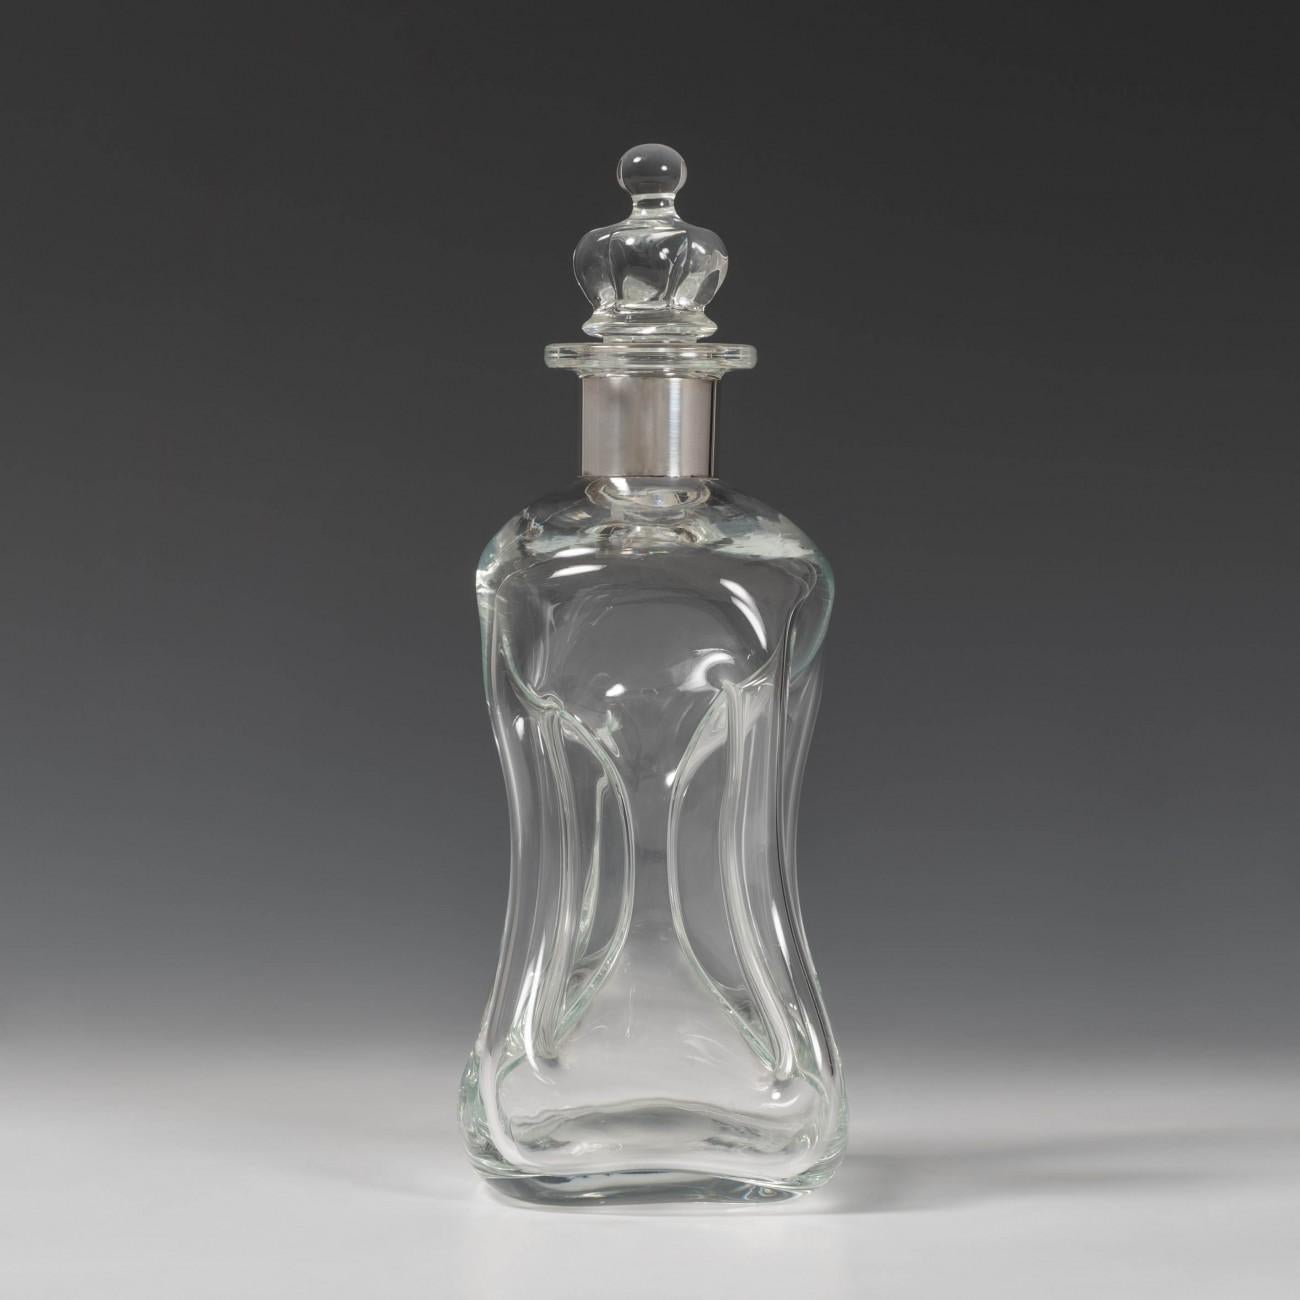 A fine 1960s Danish hand blown glass decanter with pinched sections so columns are formed at the corners and through the centre. Silver collar marked sterling and stamped with the silversmith E. Dragsted Denmark. Called a Kluk Kluk due to the sound